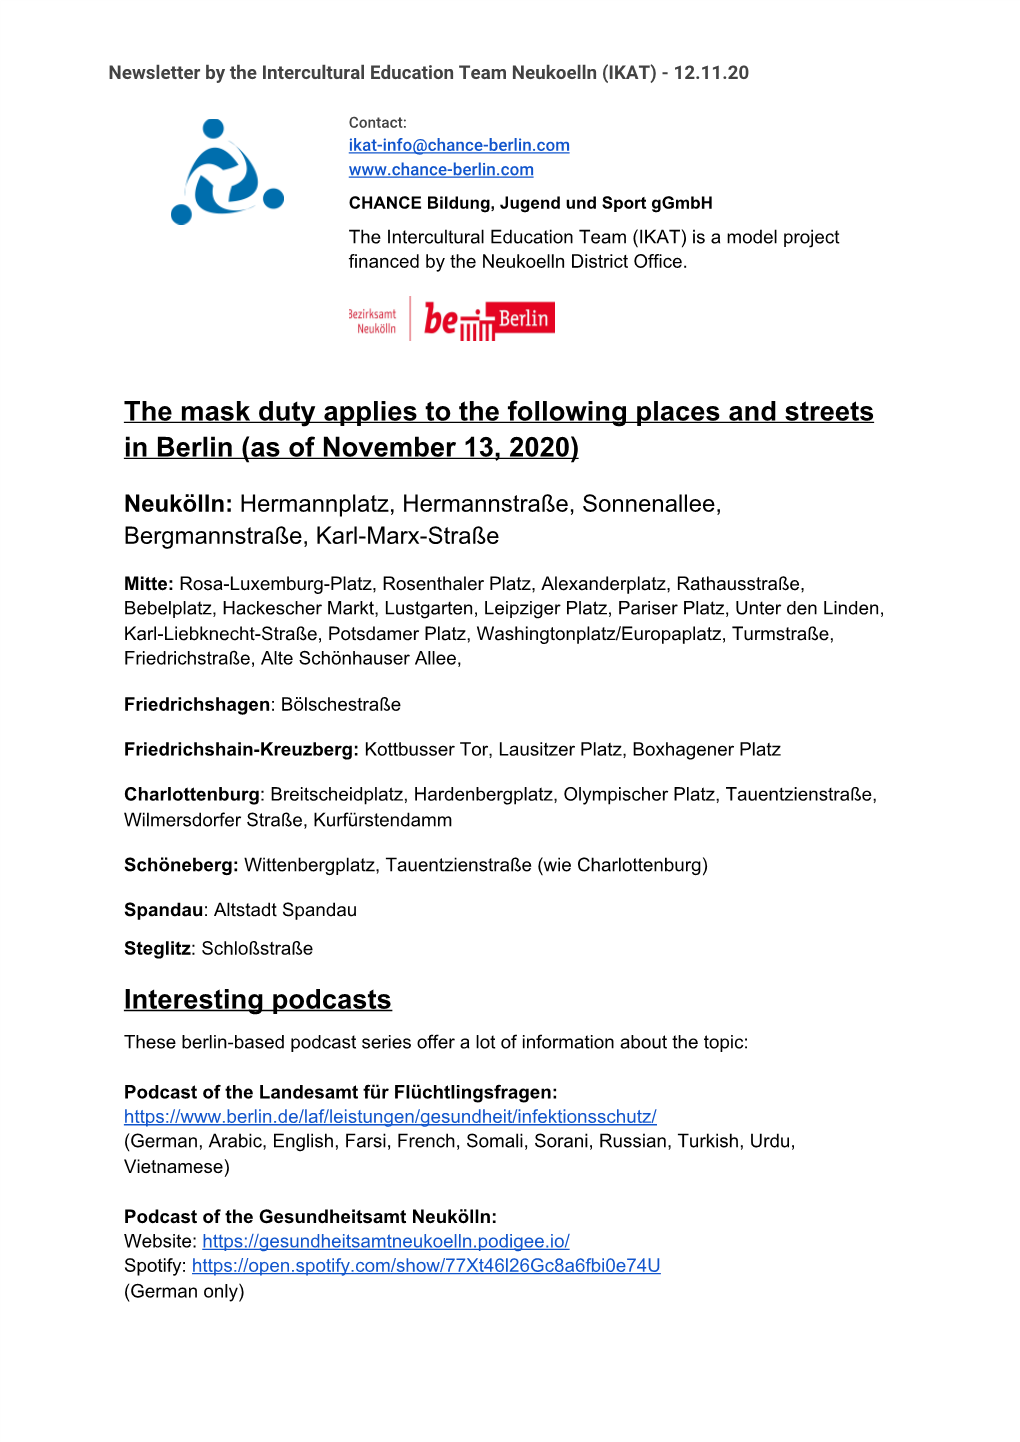 The Mask Duty Applies to the Following Places and Streets in Berlin (As of November 13, 2020)